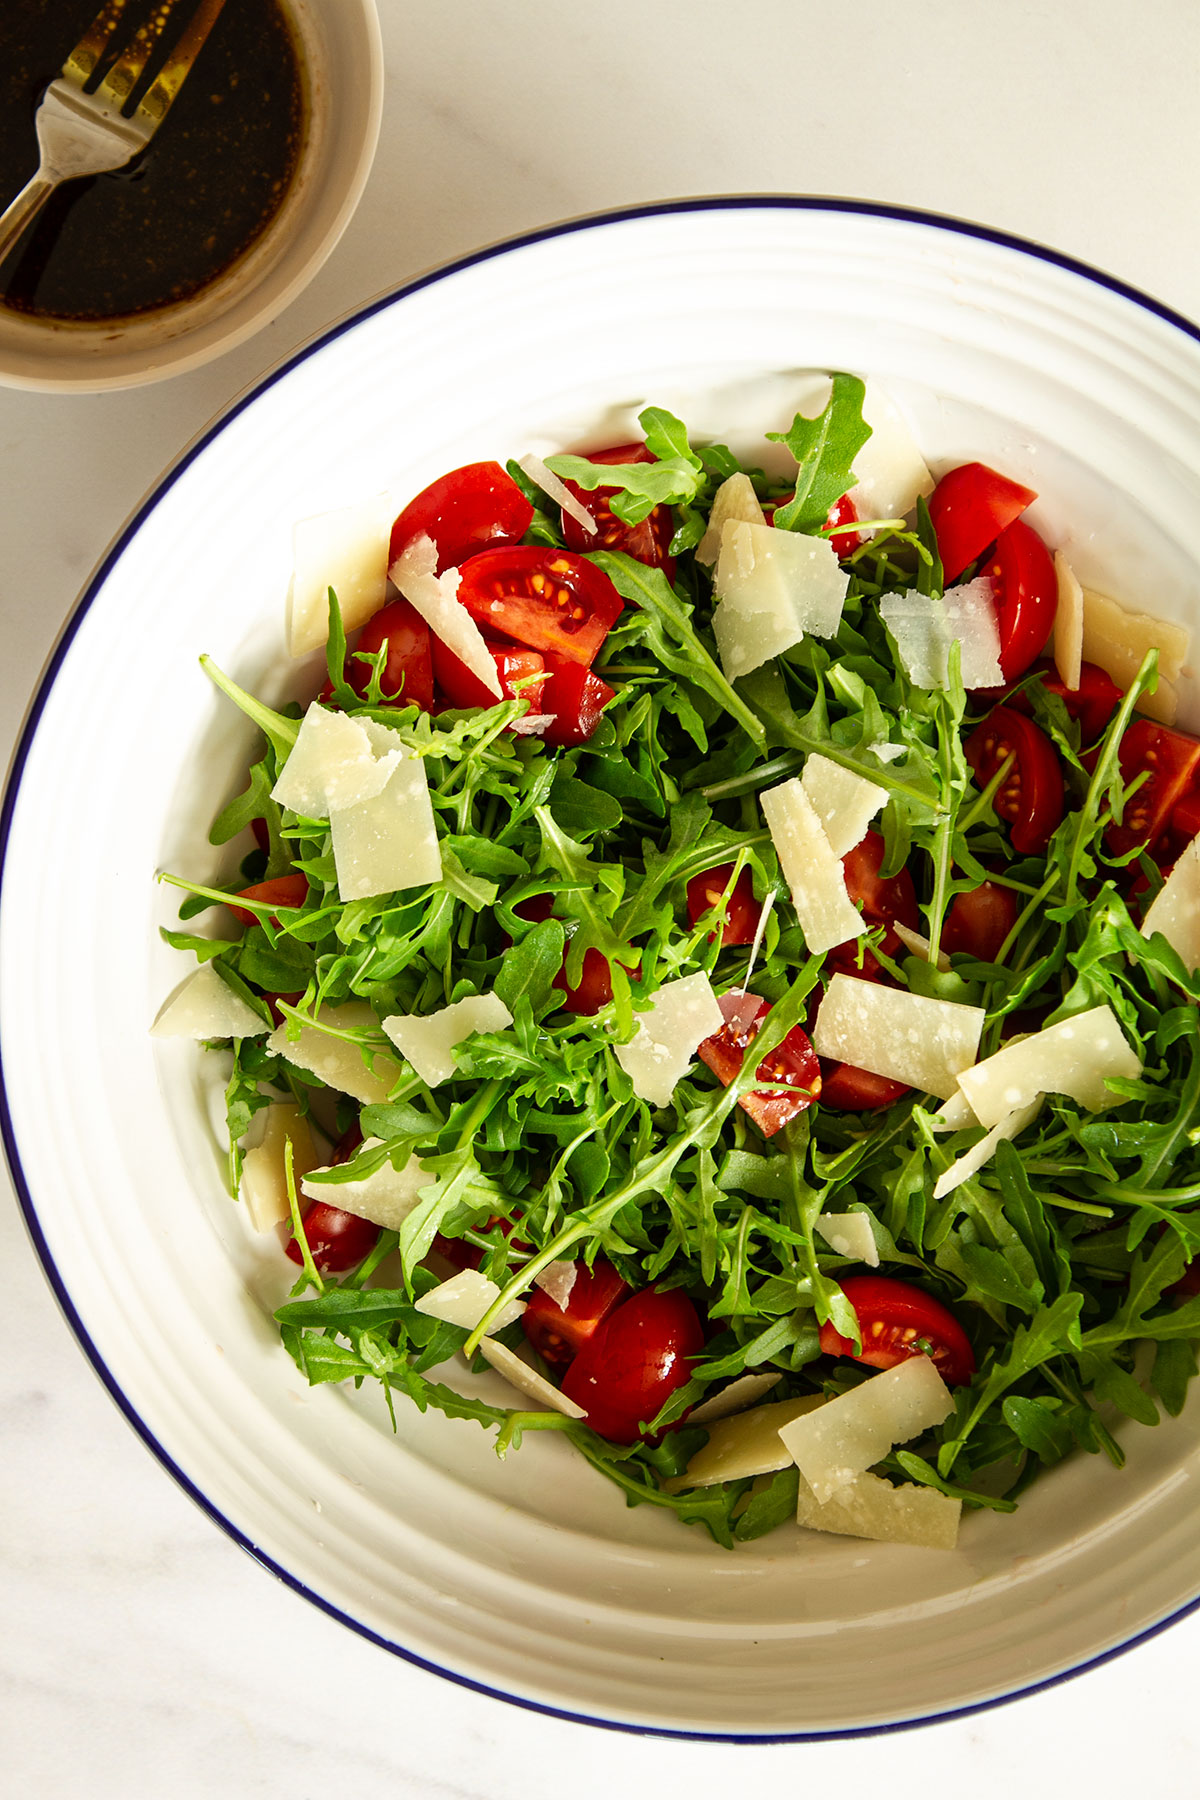 Rocket salad with tomatoes and Parmesan shavings in a white bowl.